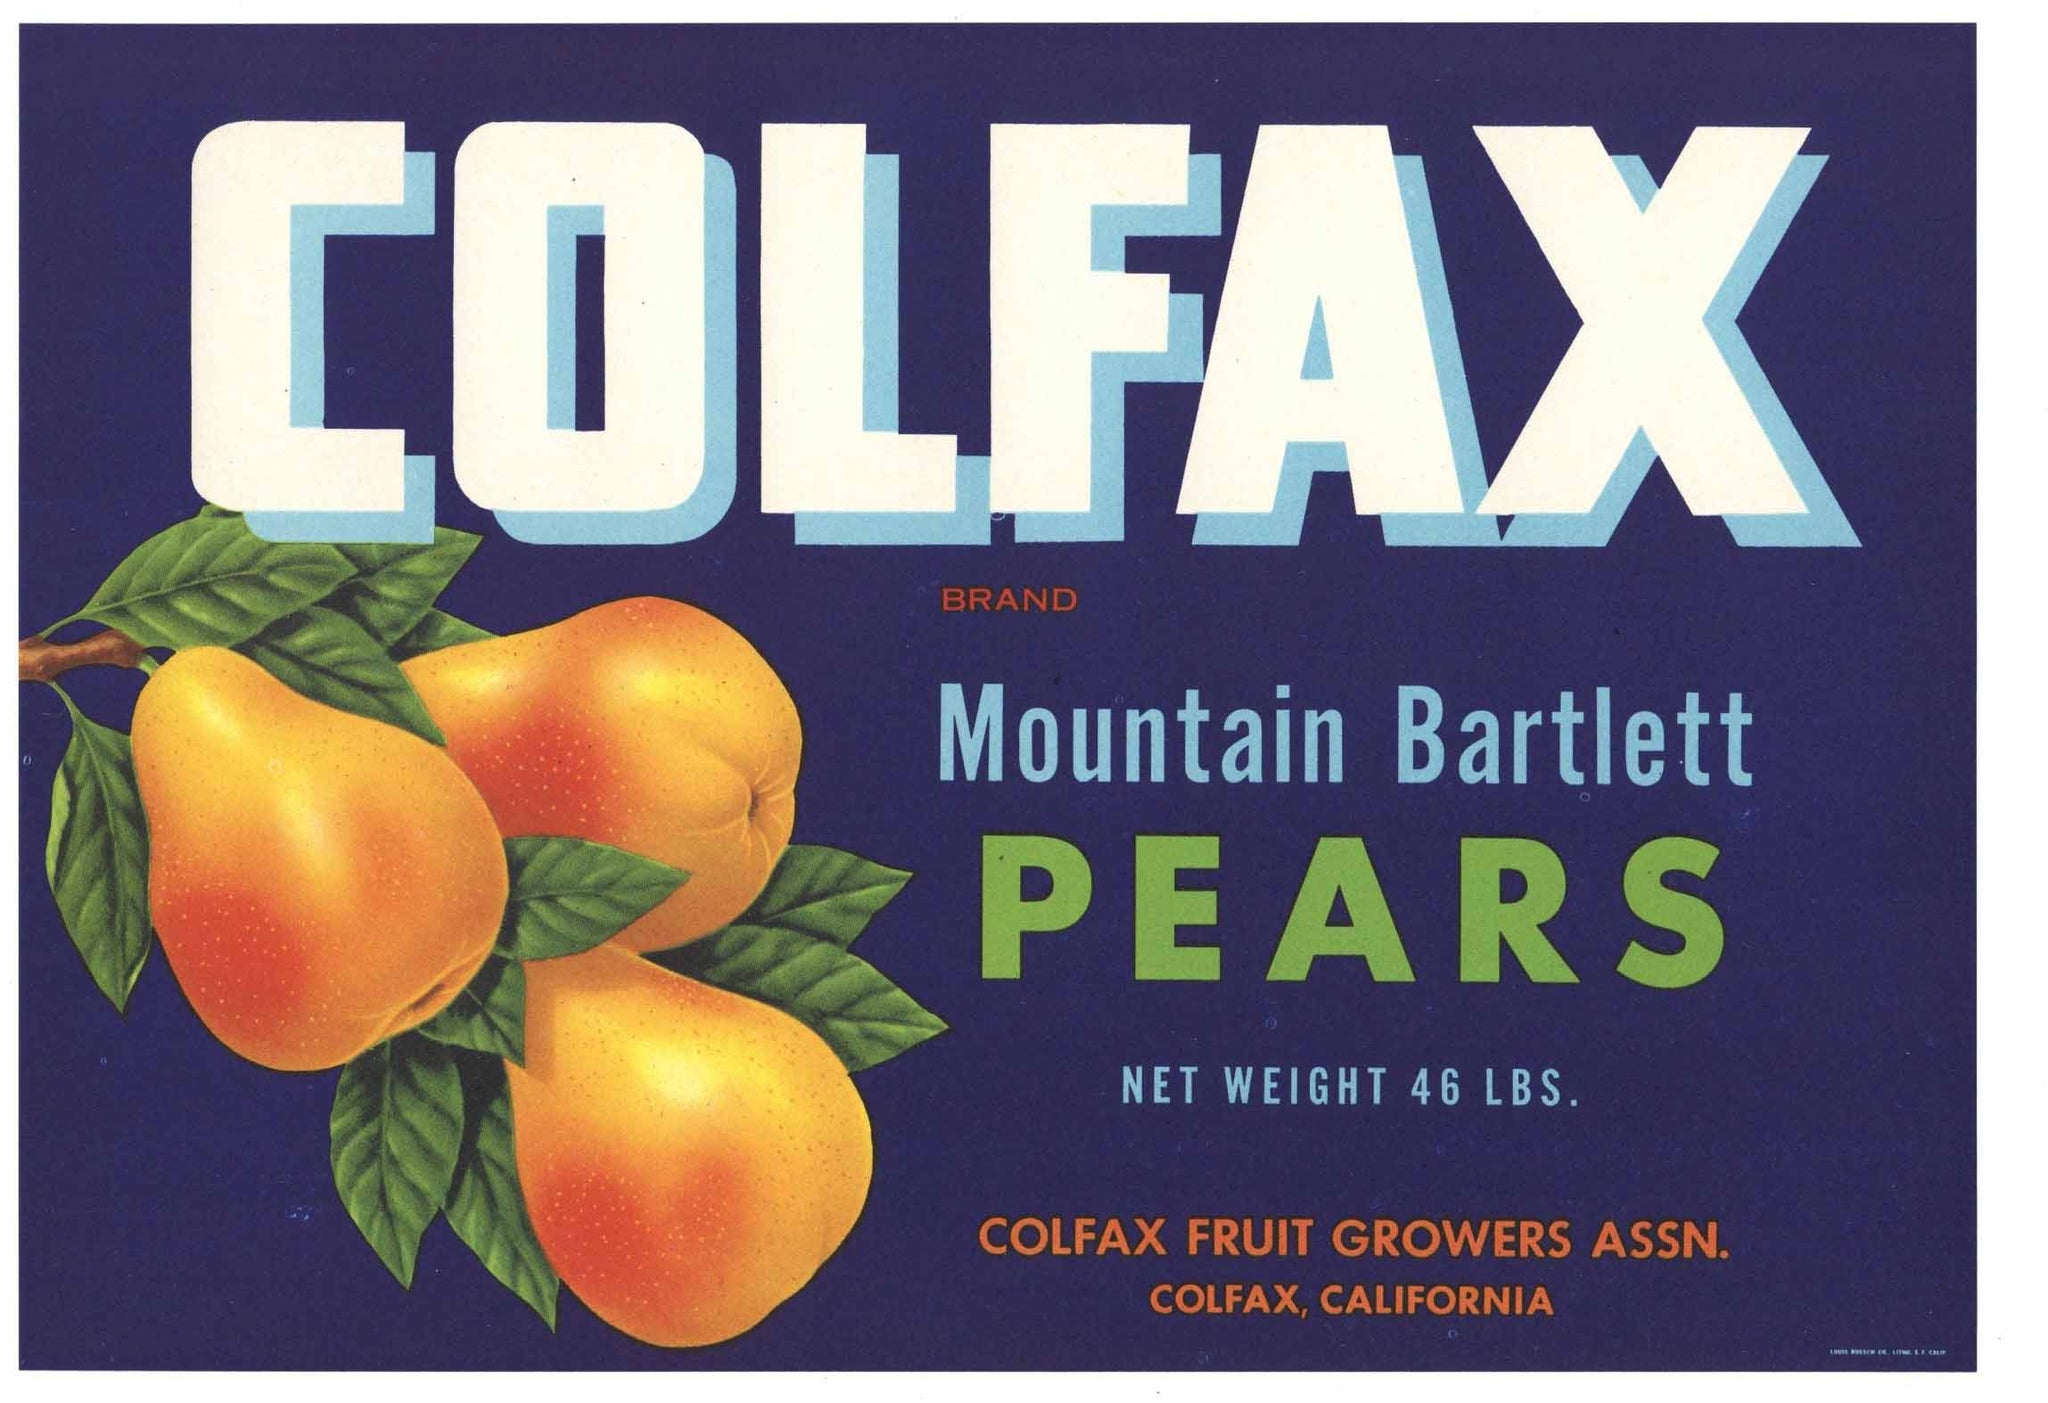 Colfax Brand Vintage Placer County California Pear Crate Label, blue